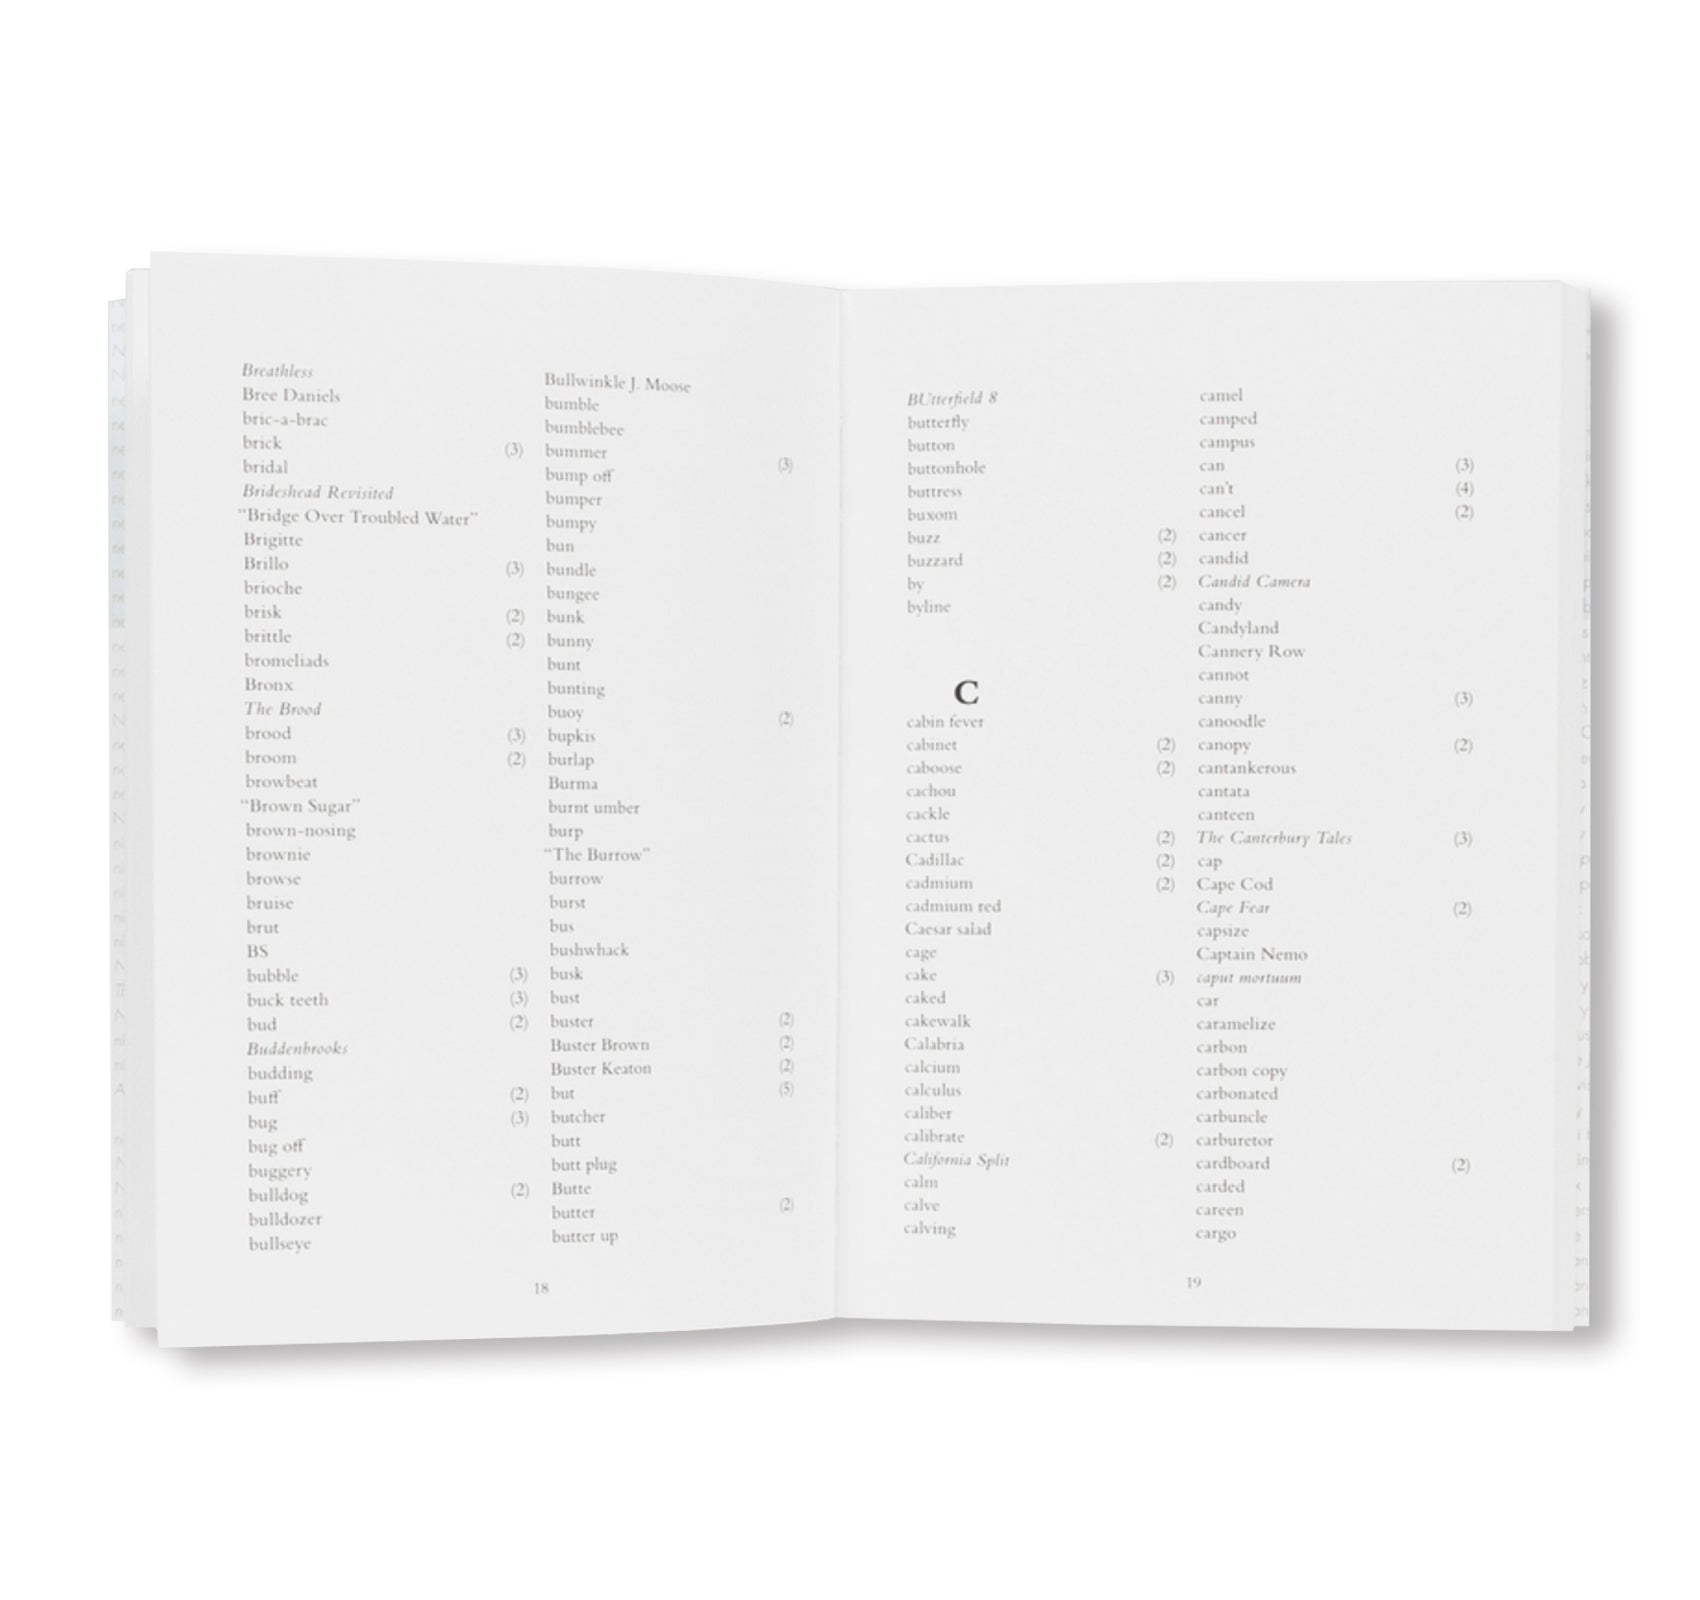 REMEMBERED WORDS A SPECIMEN CONCORDANCE by Roni Horn